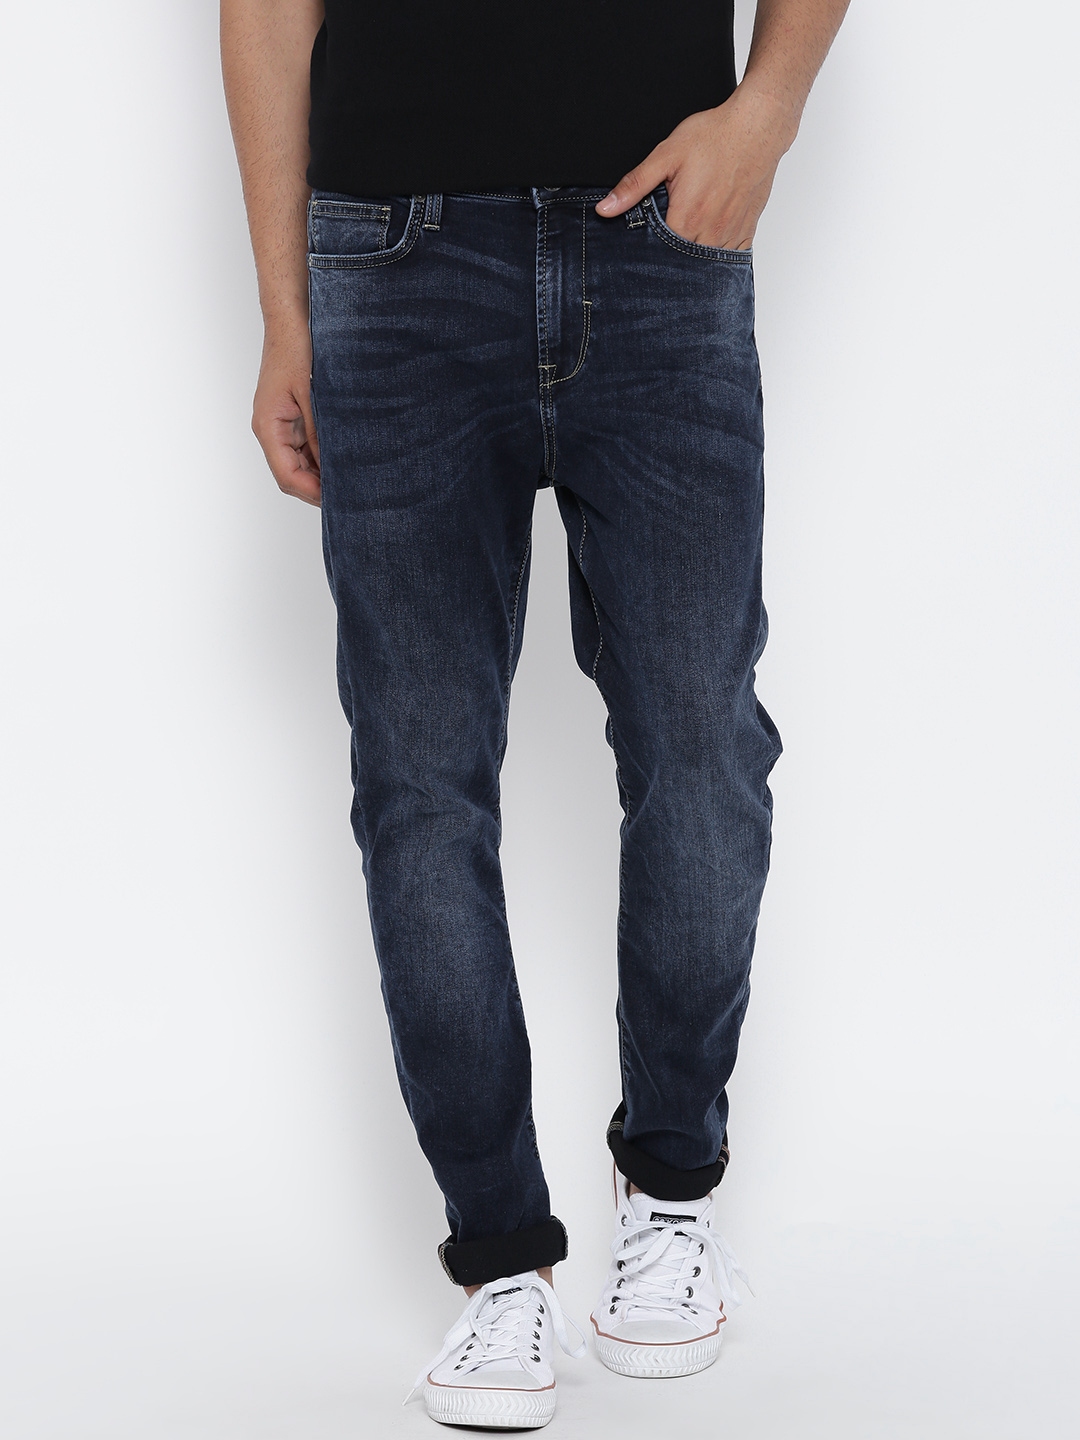 ucb carrot fit jeans